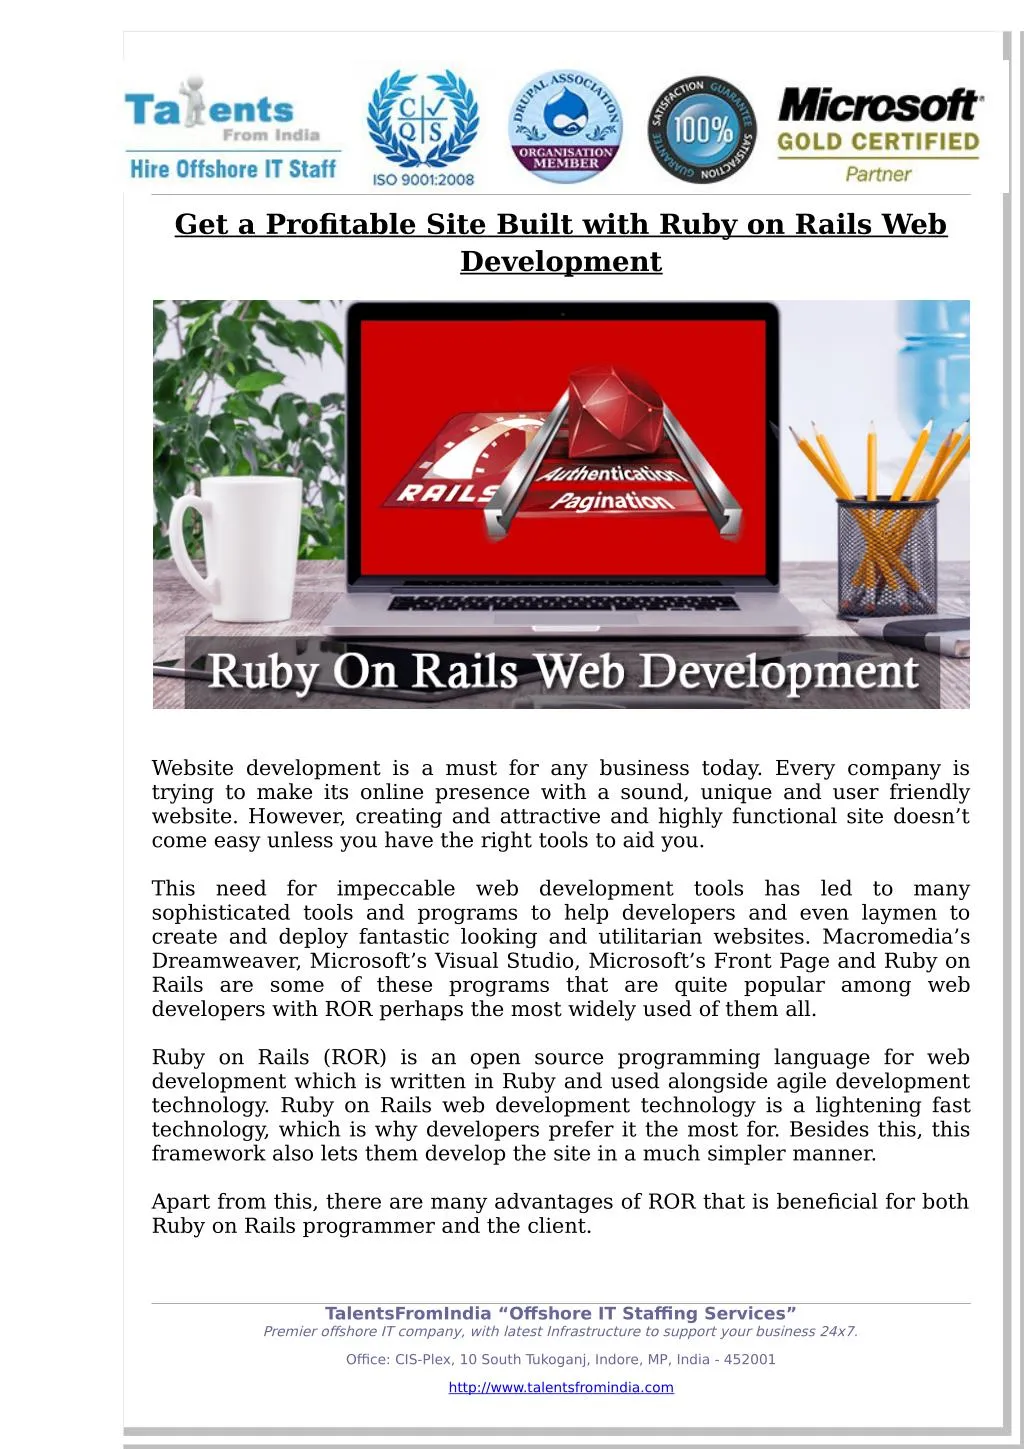 get a profitable site built with ruby on rails